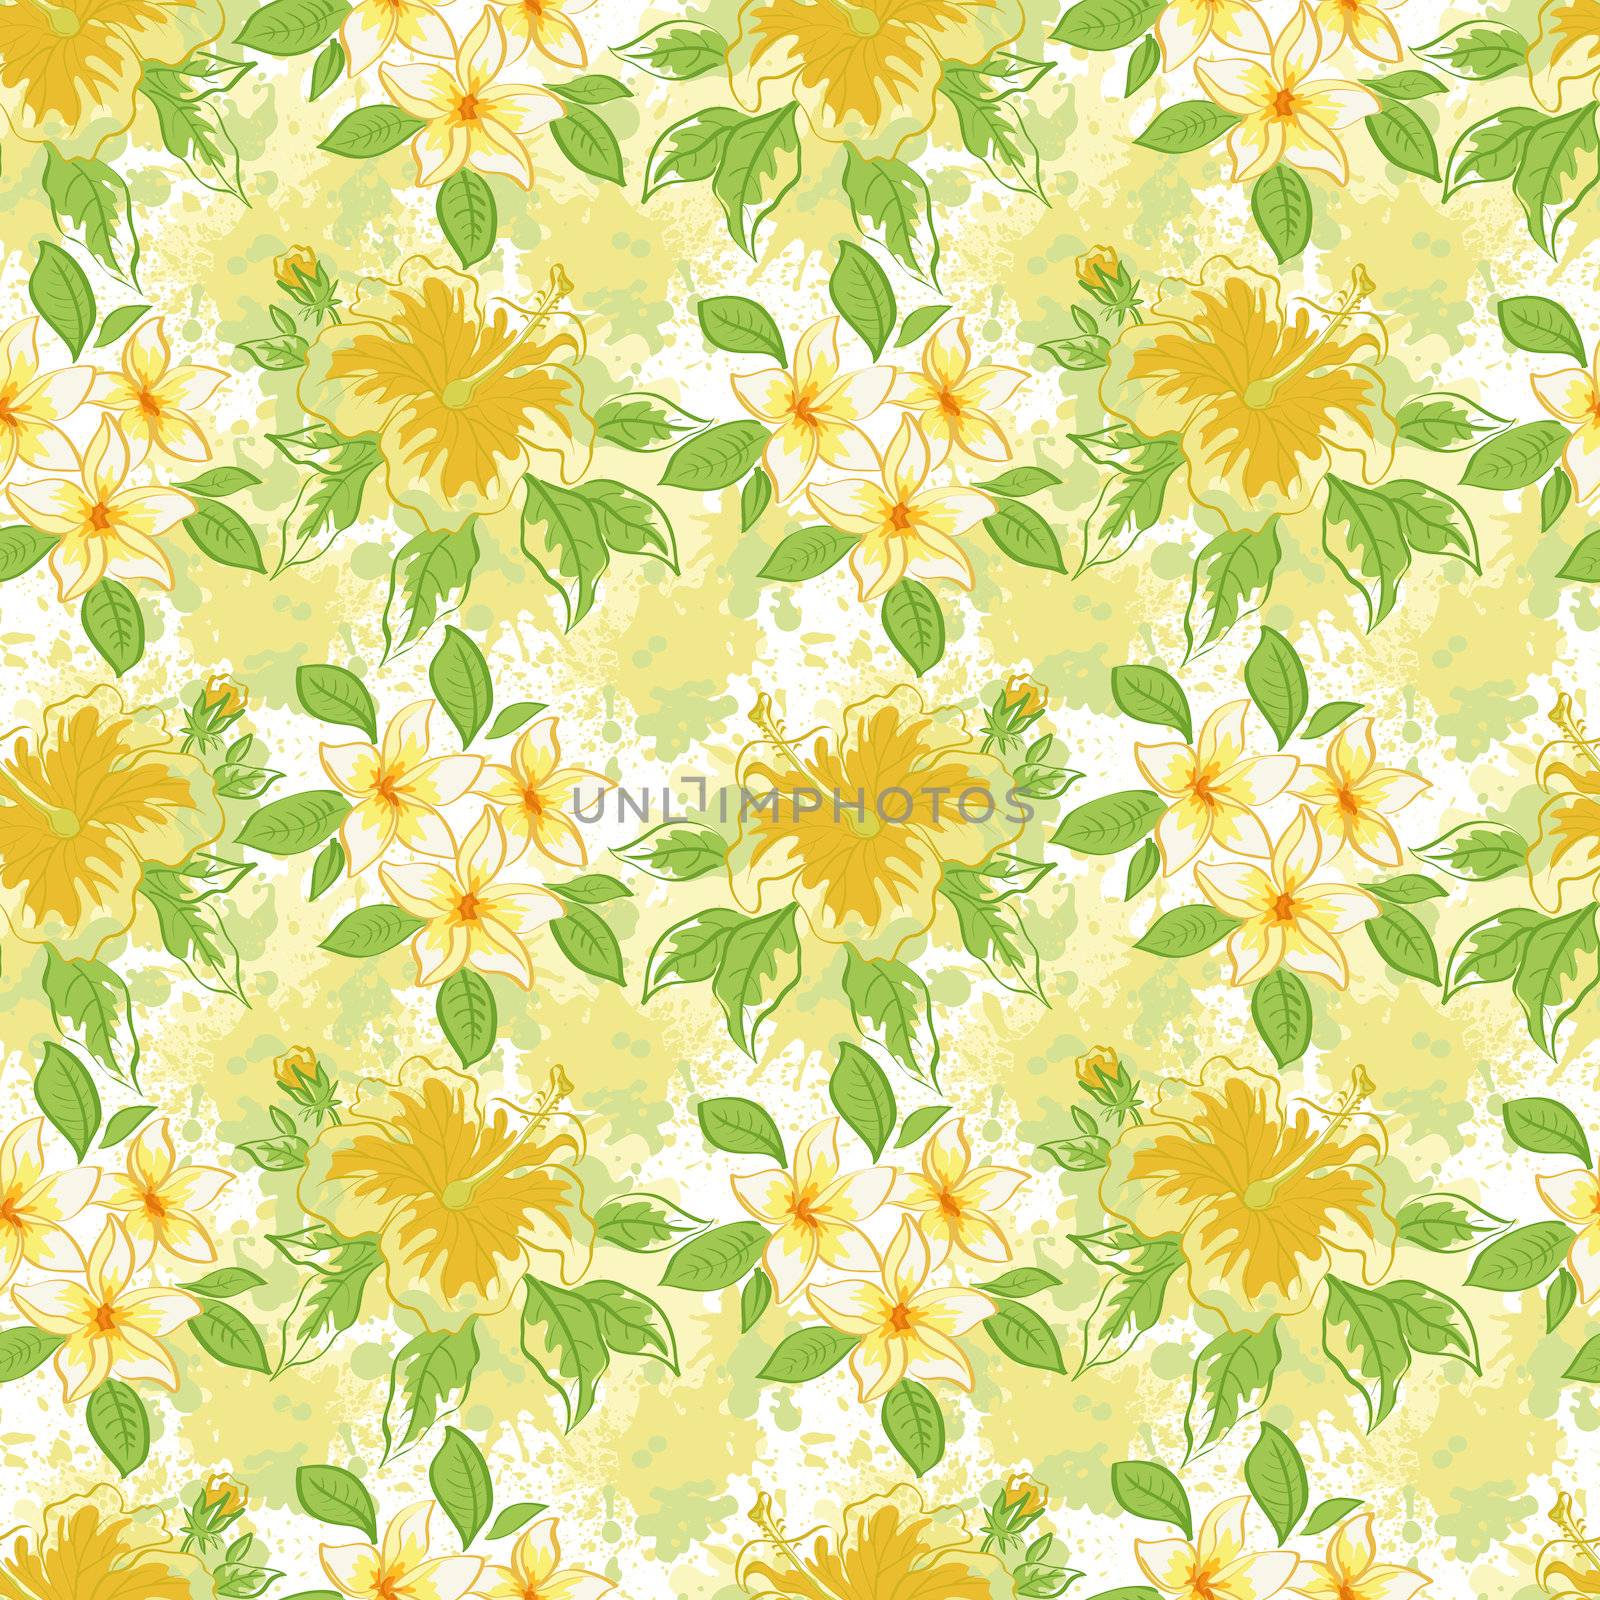 Seamless floral pattern, hibiscus and plumeria flowers on abstract background.